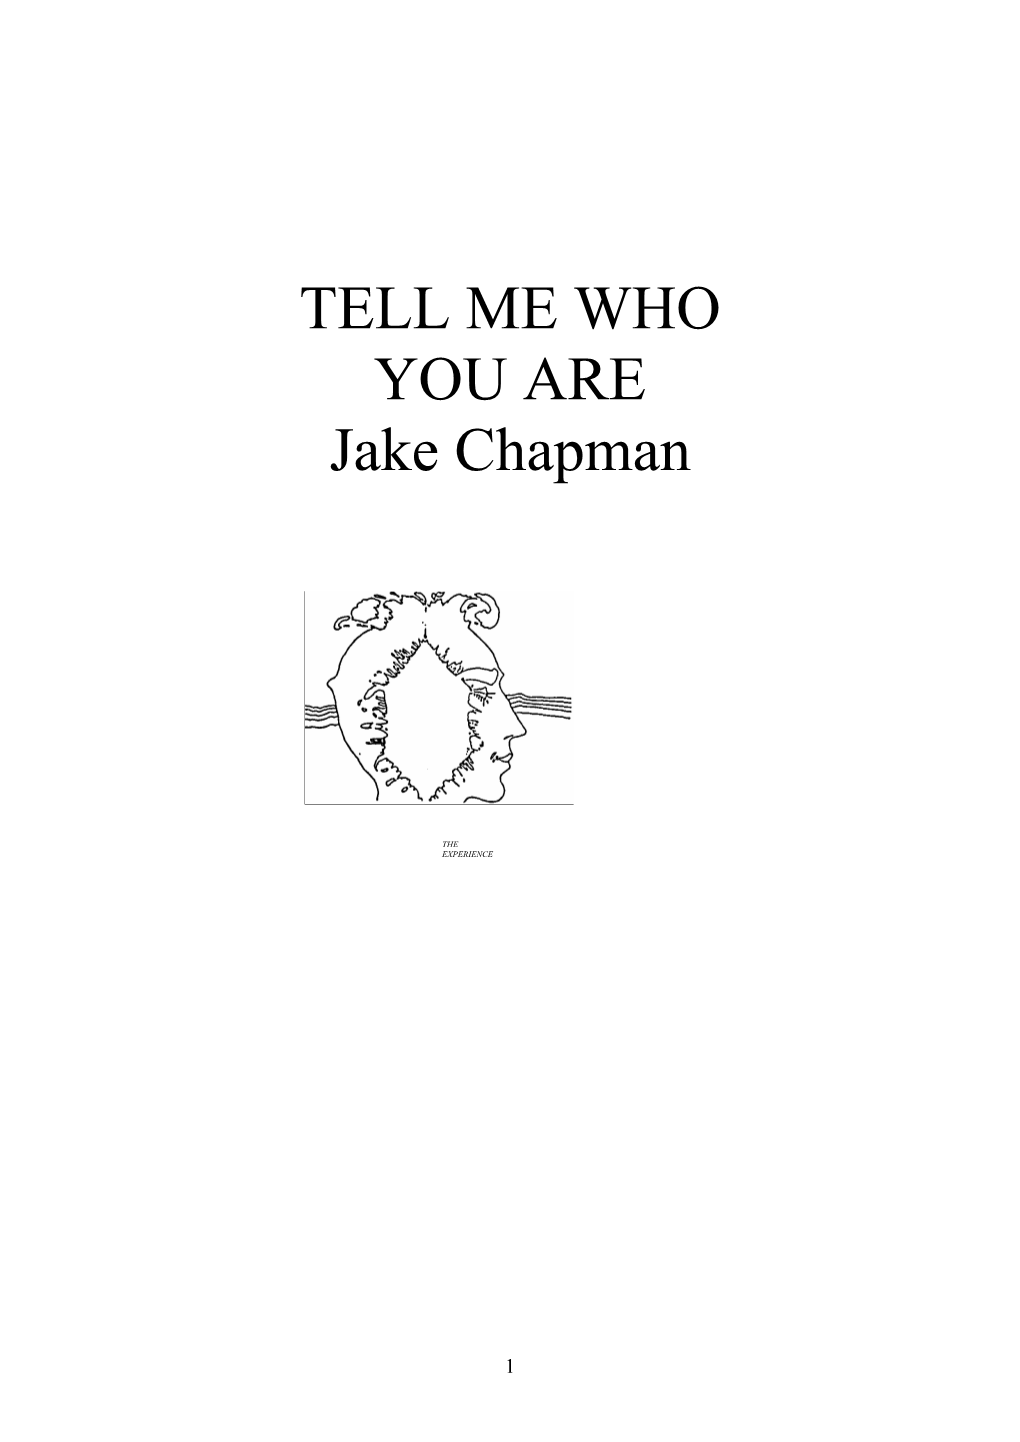 TELL ME WHO YOU ARE Jake Chapman